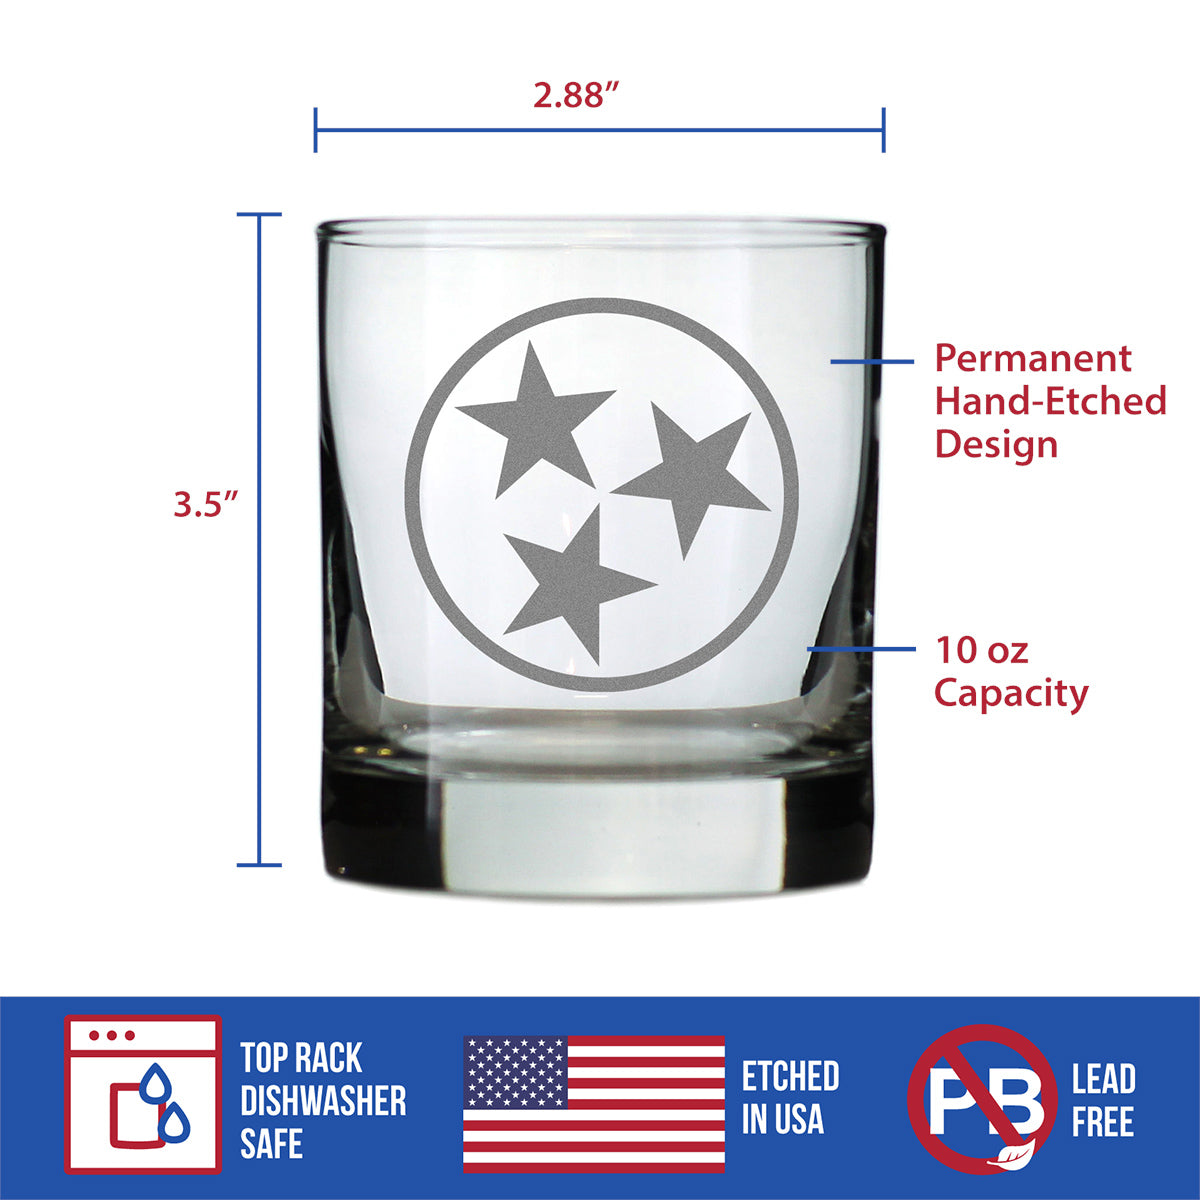 Tennessee Flag Whiskey Rocks Glass - State Themed Drinking Decor and Gifts for Tennessean Women &amp; Men - 10.25 Oz Whisky Tumbler Glasses